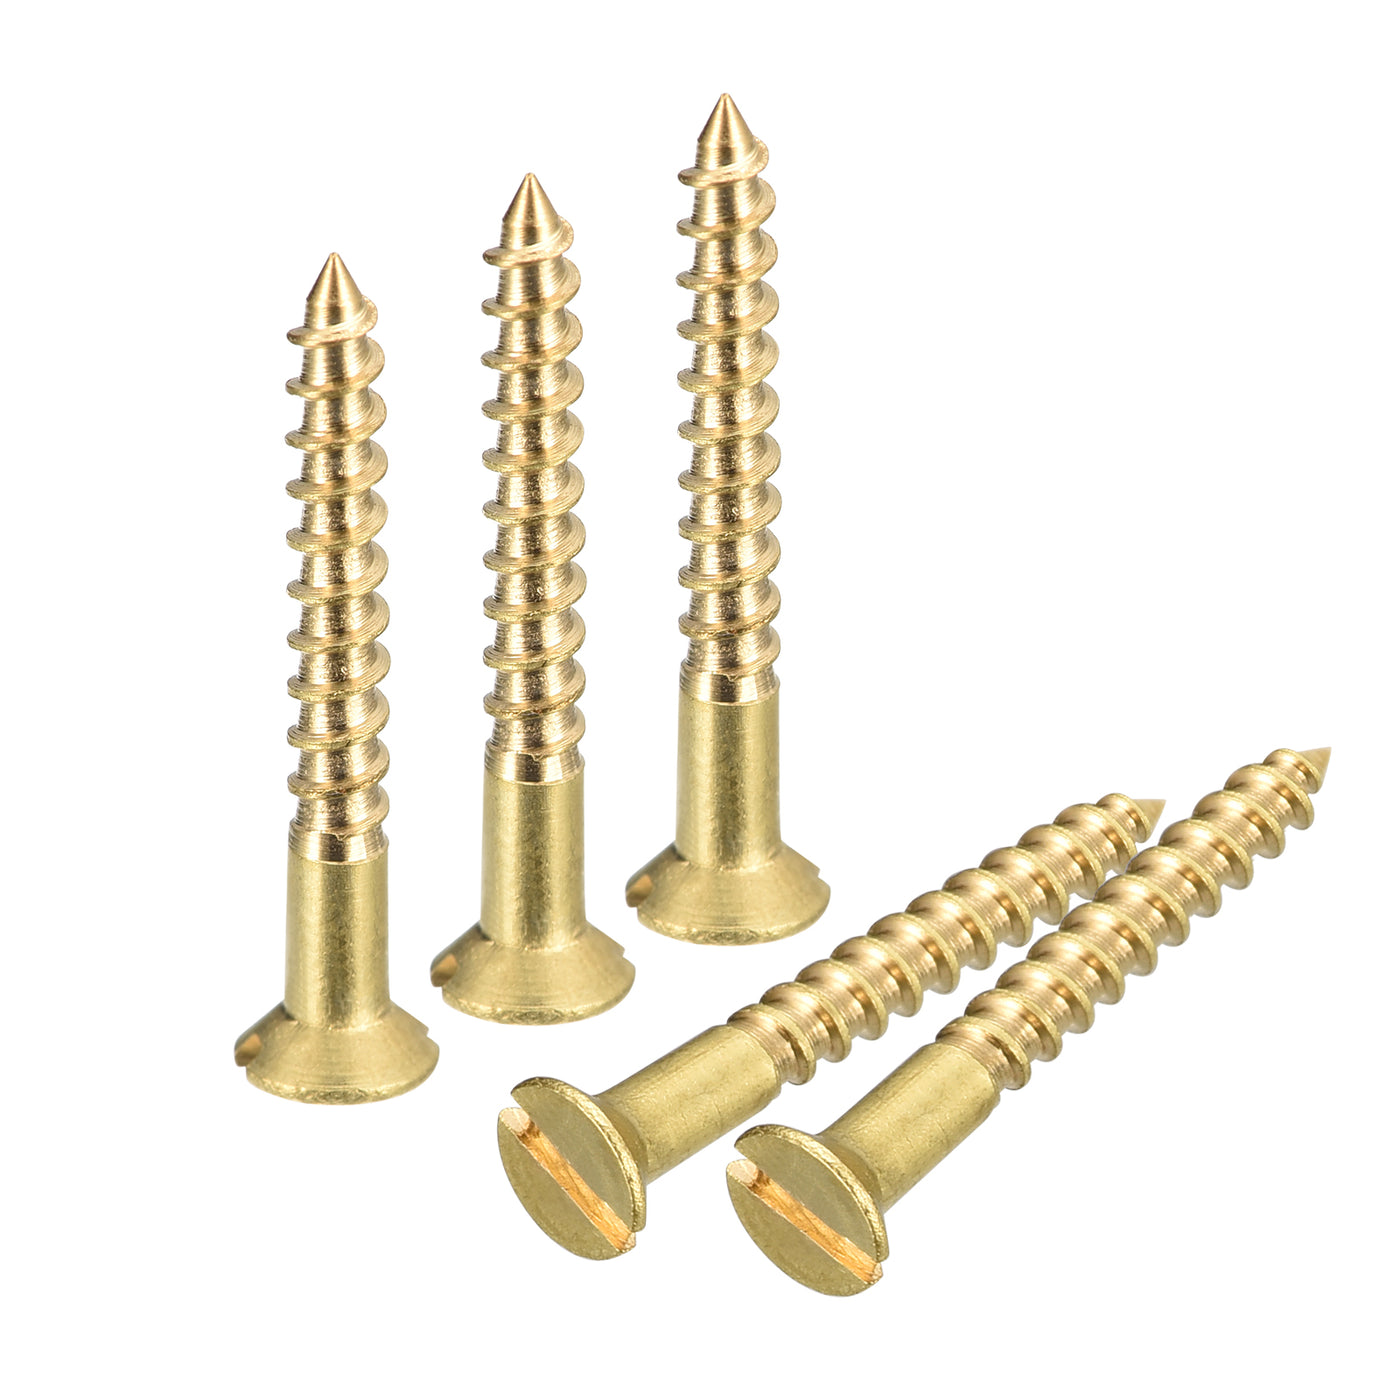 uxcell Uxcell 100Pcs M2.5 x 20mm Brass Slotted Drive Flat Head Wood Screws Self Tapping Screw